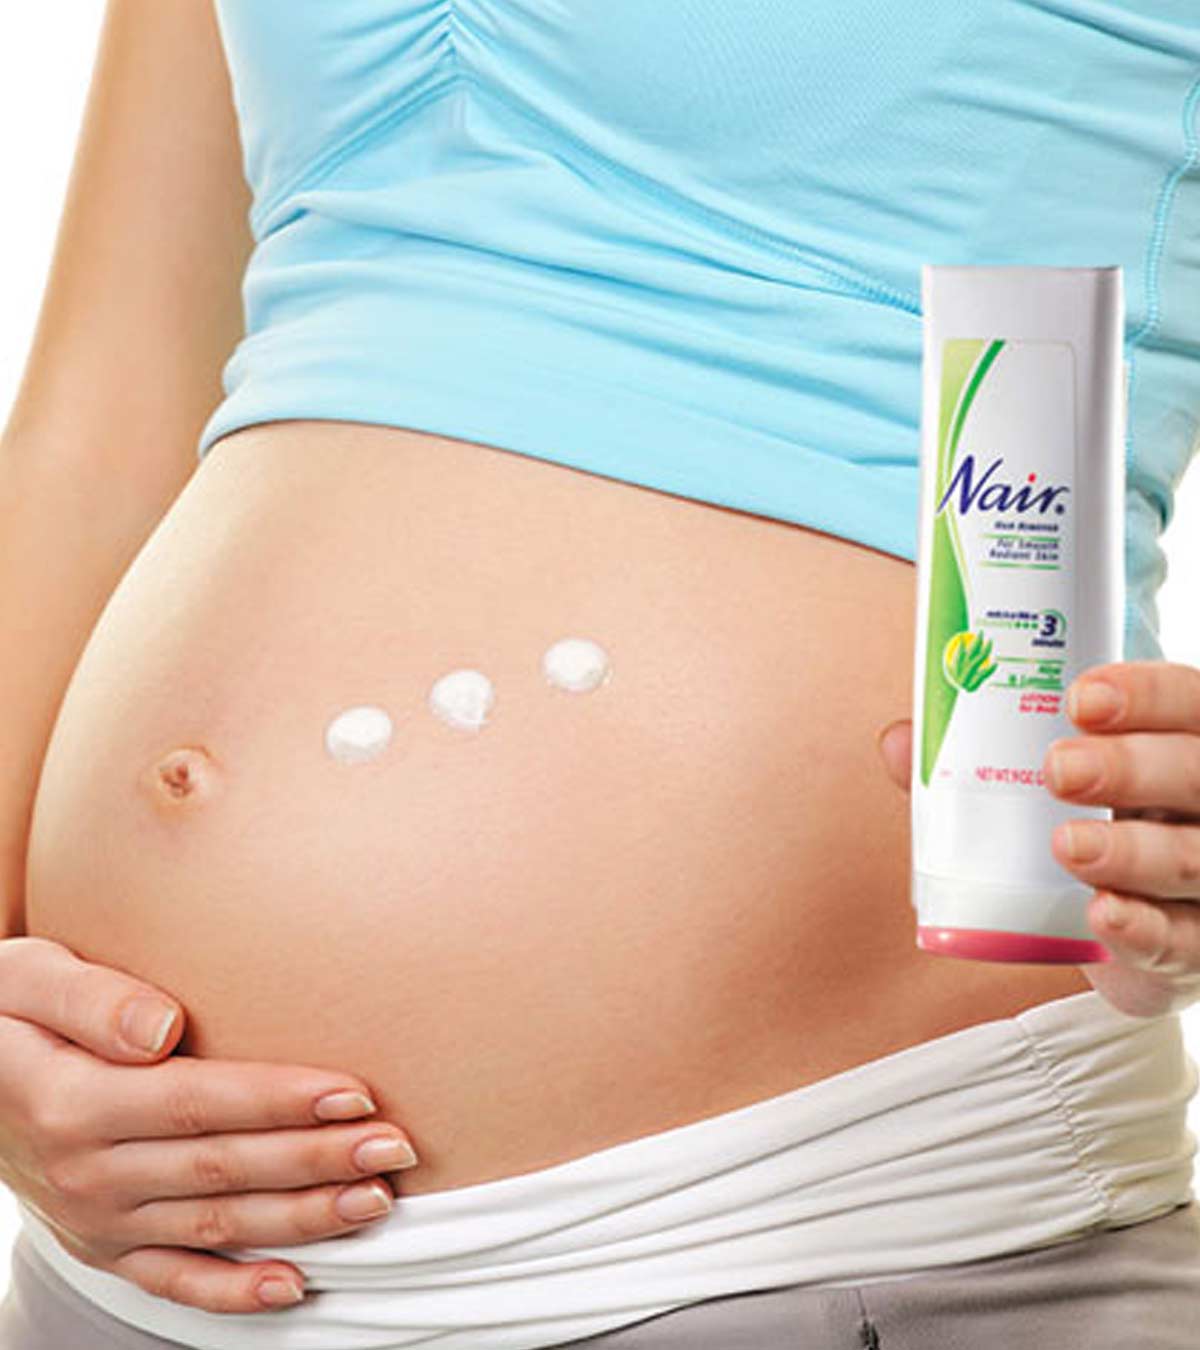 Is It Safe To Use Hair Removal Cream On Private Parts During Pregnancy